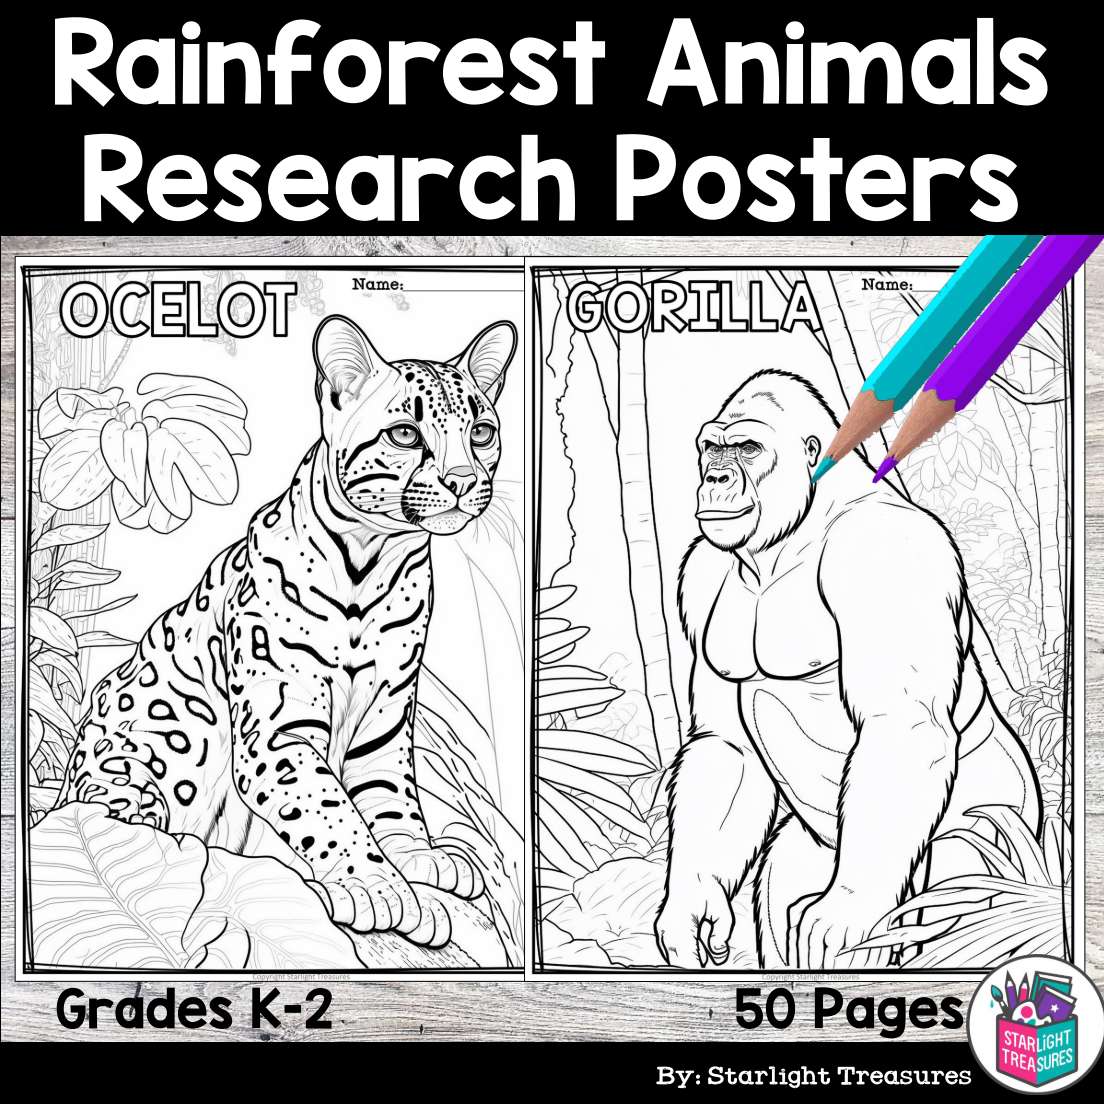 Rainforest animals research posters coloring pages